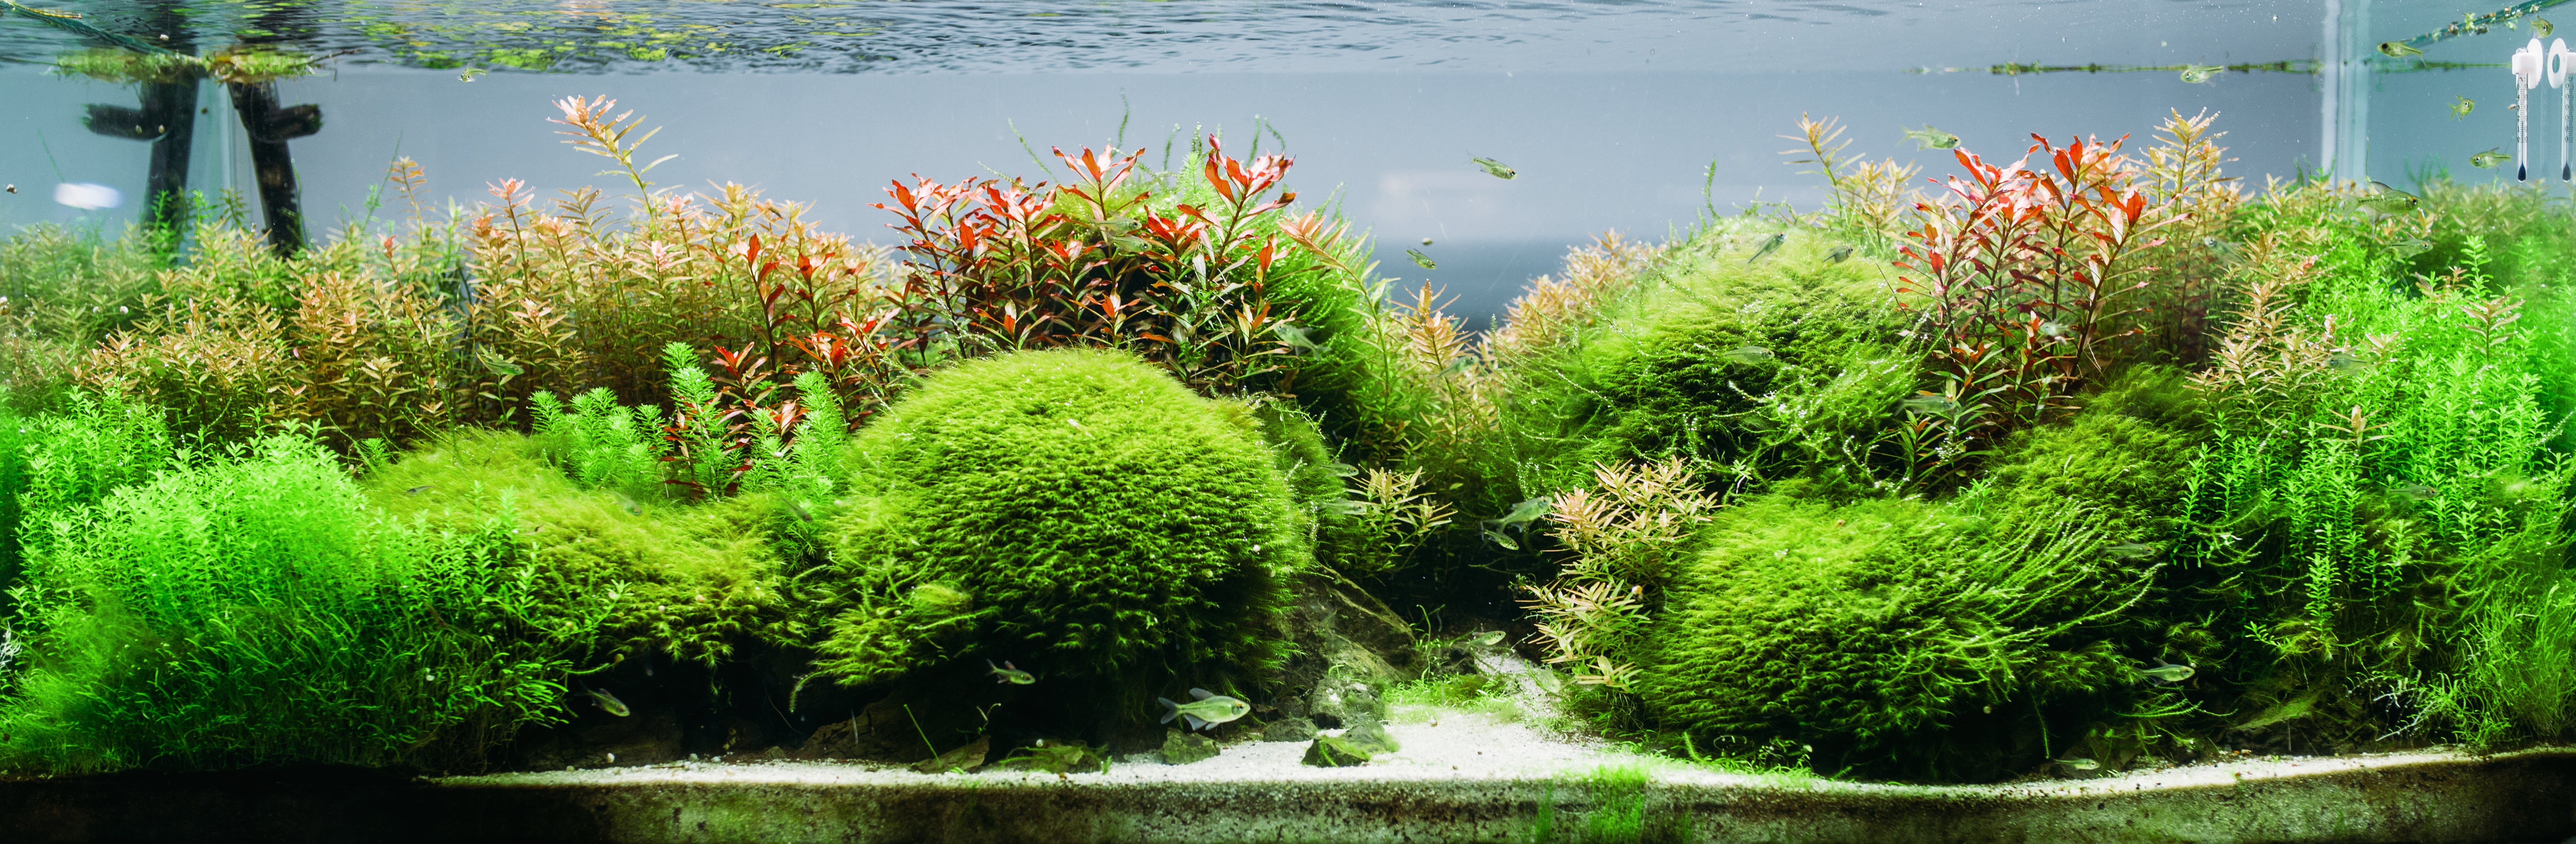 A Guide to Aquascaping and Choosing the Right Aquarium Plants by